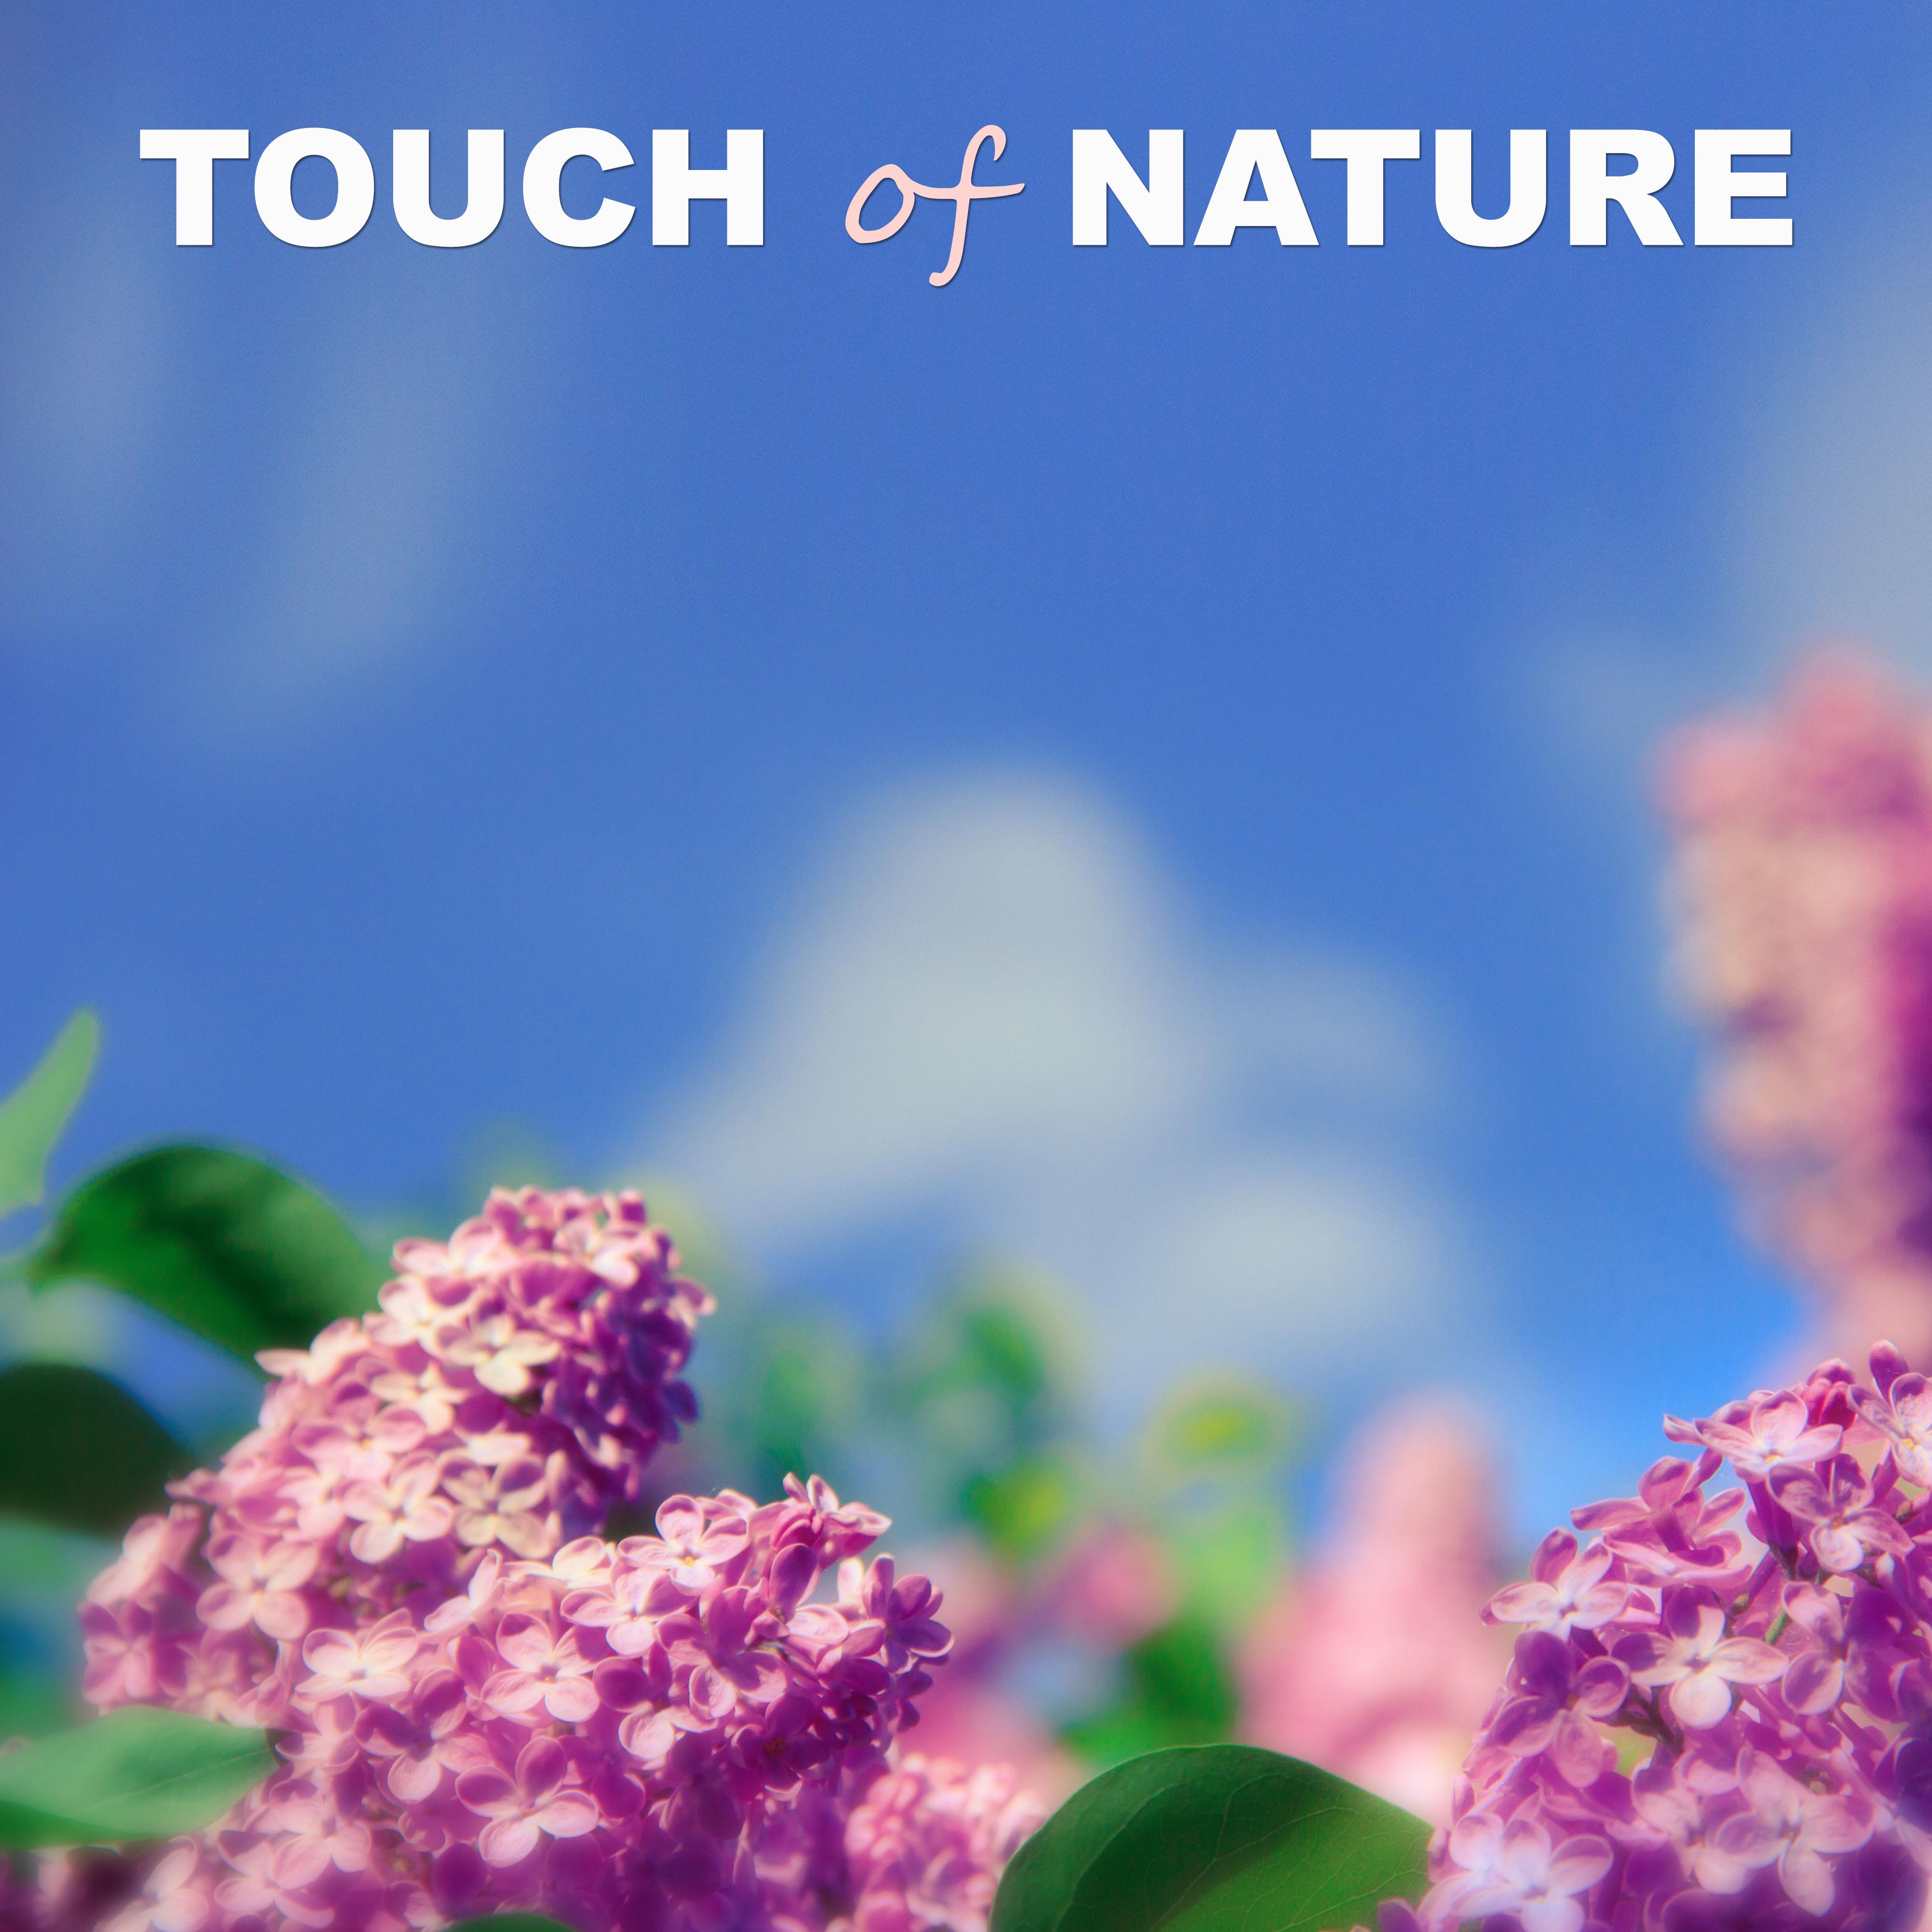 Touch of Nature – Calming Nature Sounds for Relaxation, Meditation, Spa, Wellness, Background Music for Relax, New Age Music